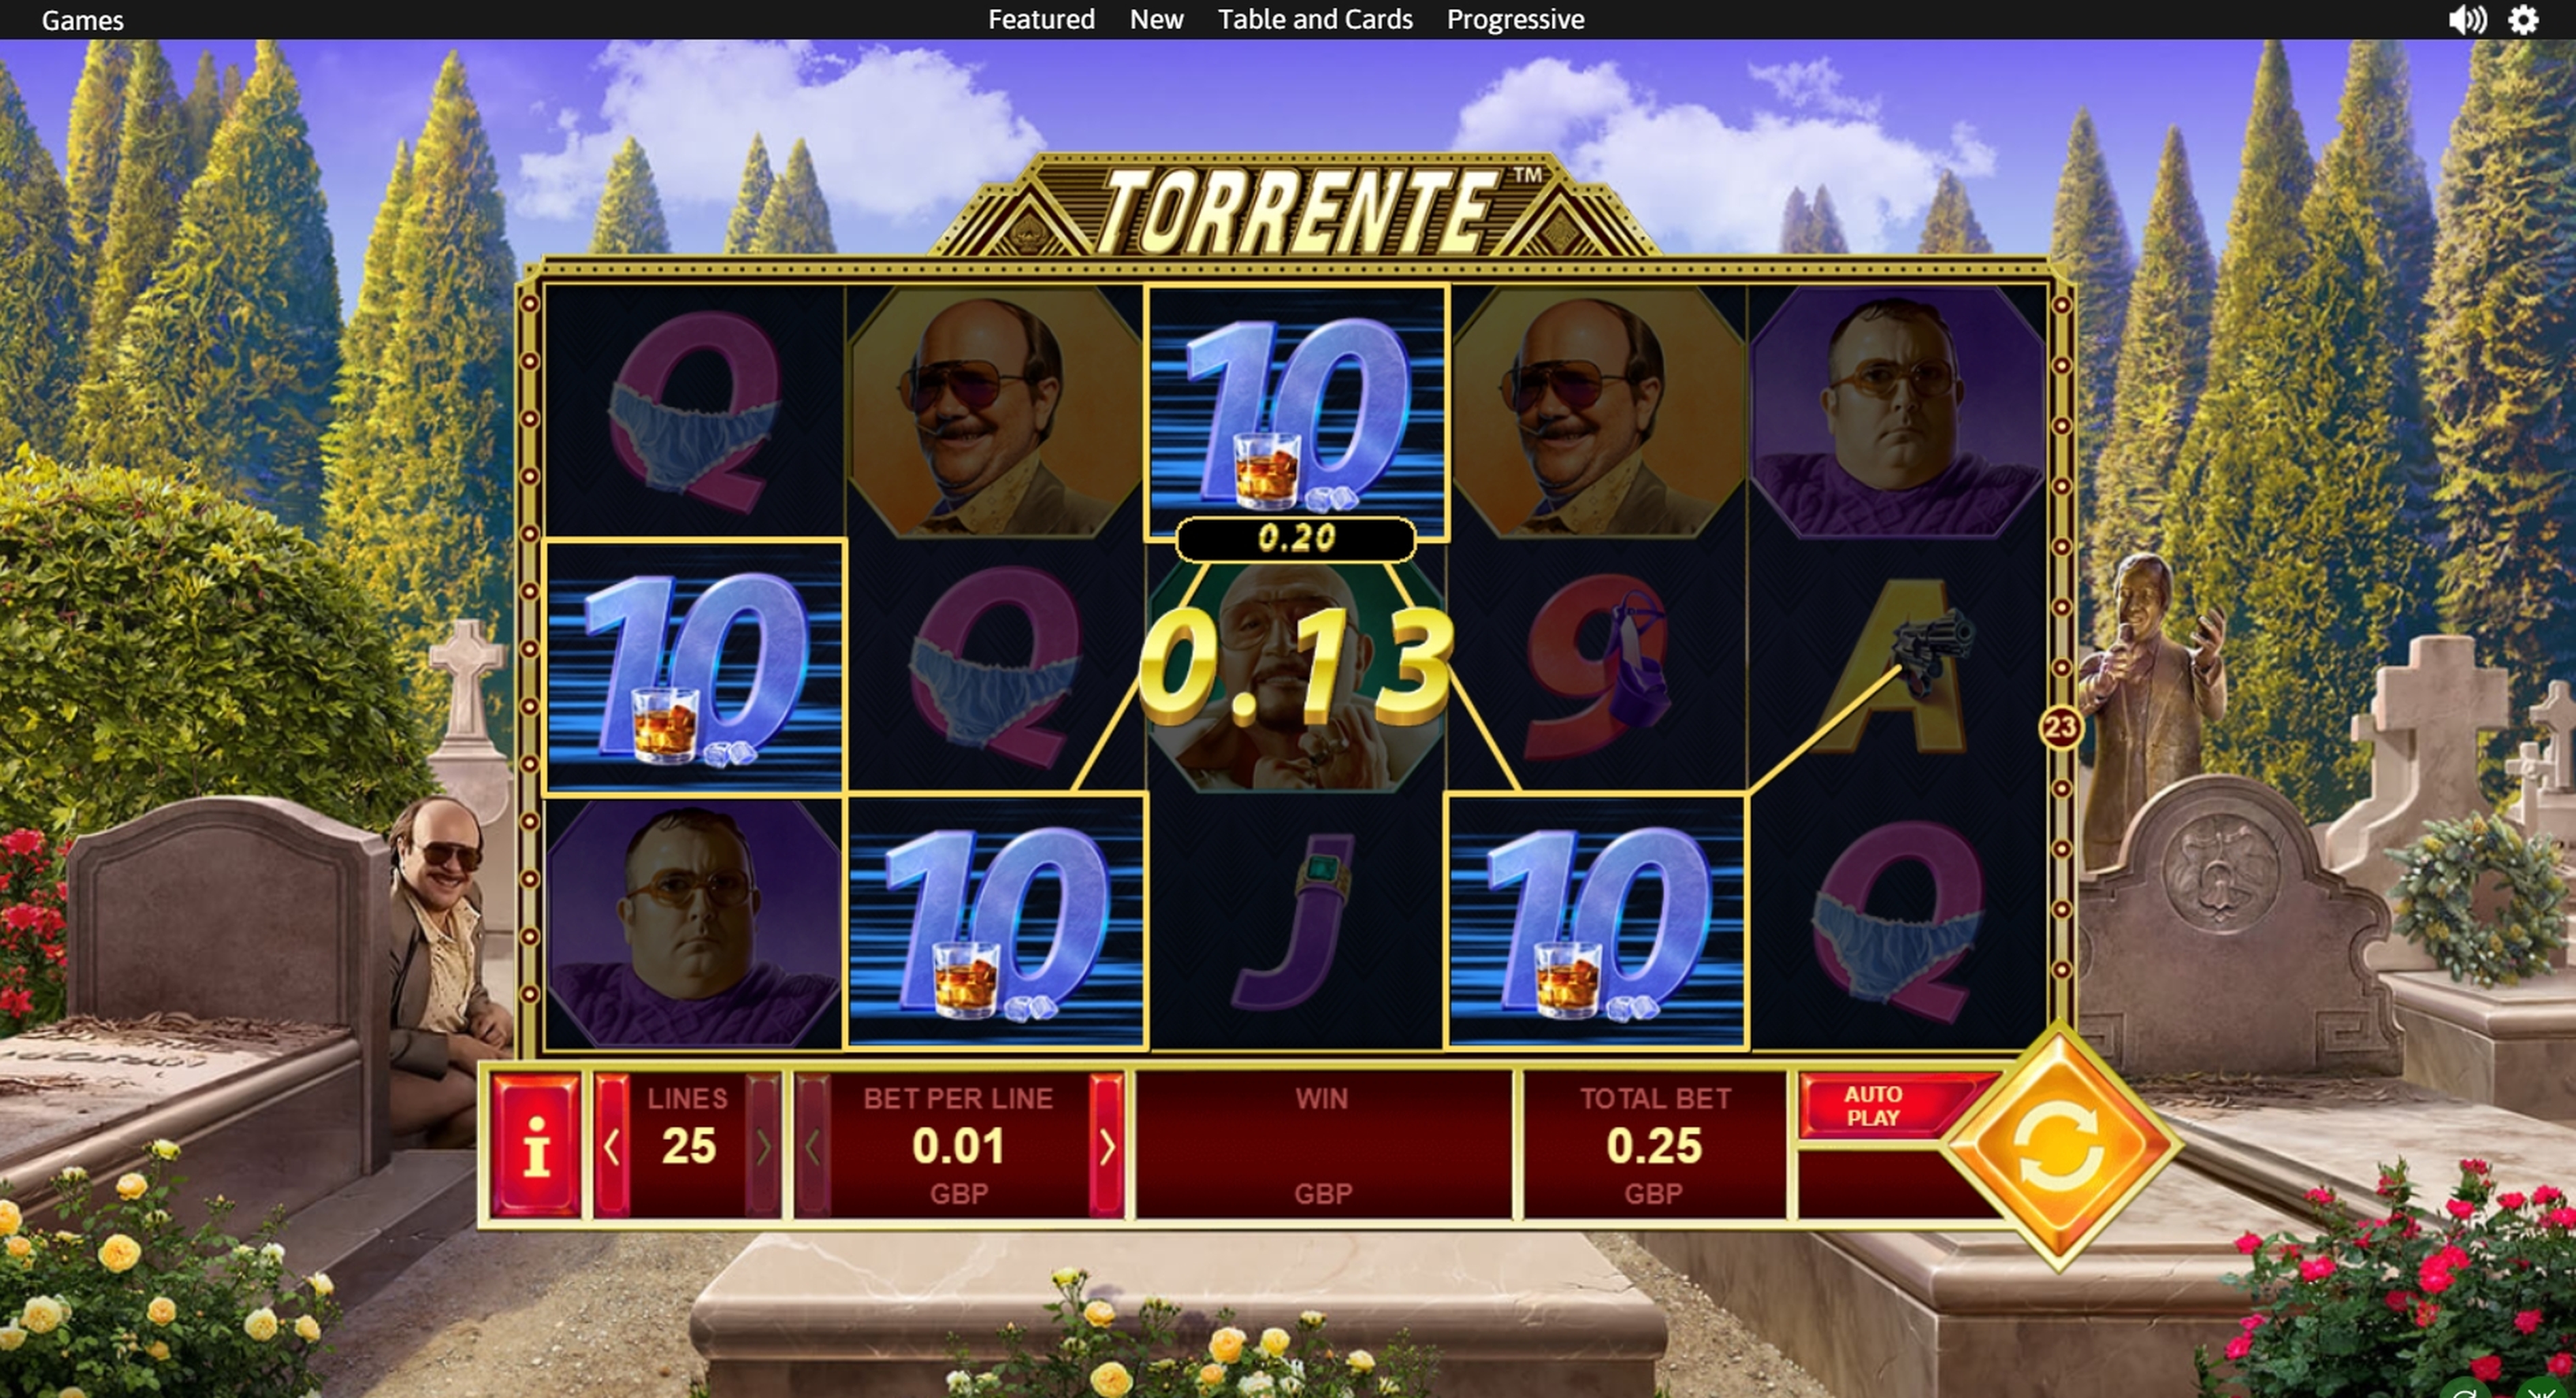 Win Money in Torrente Free Slot Game by Playtech